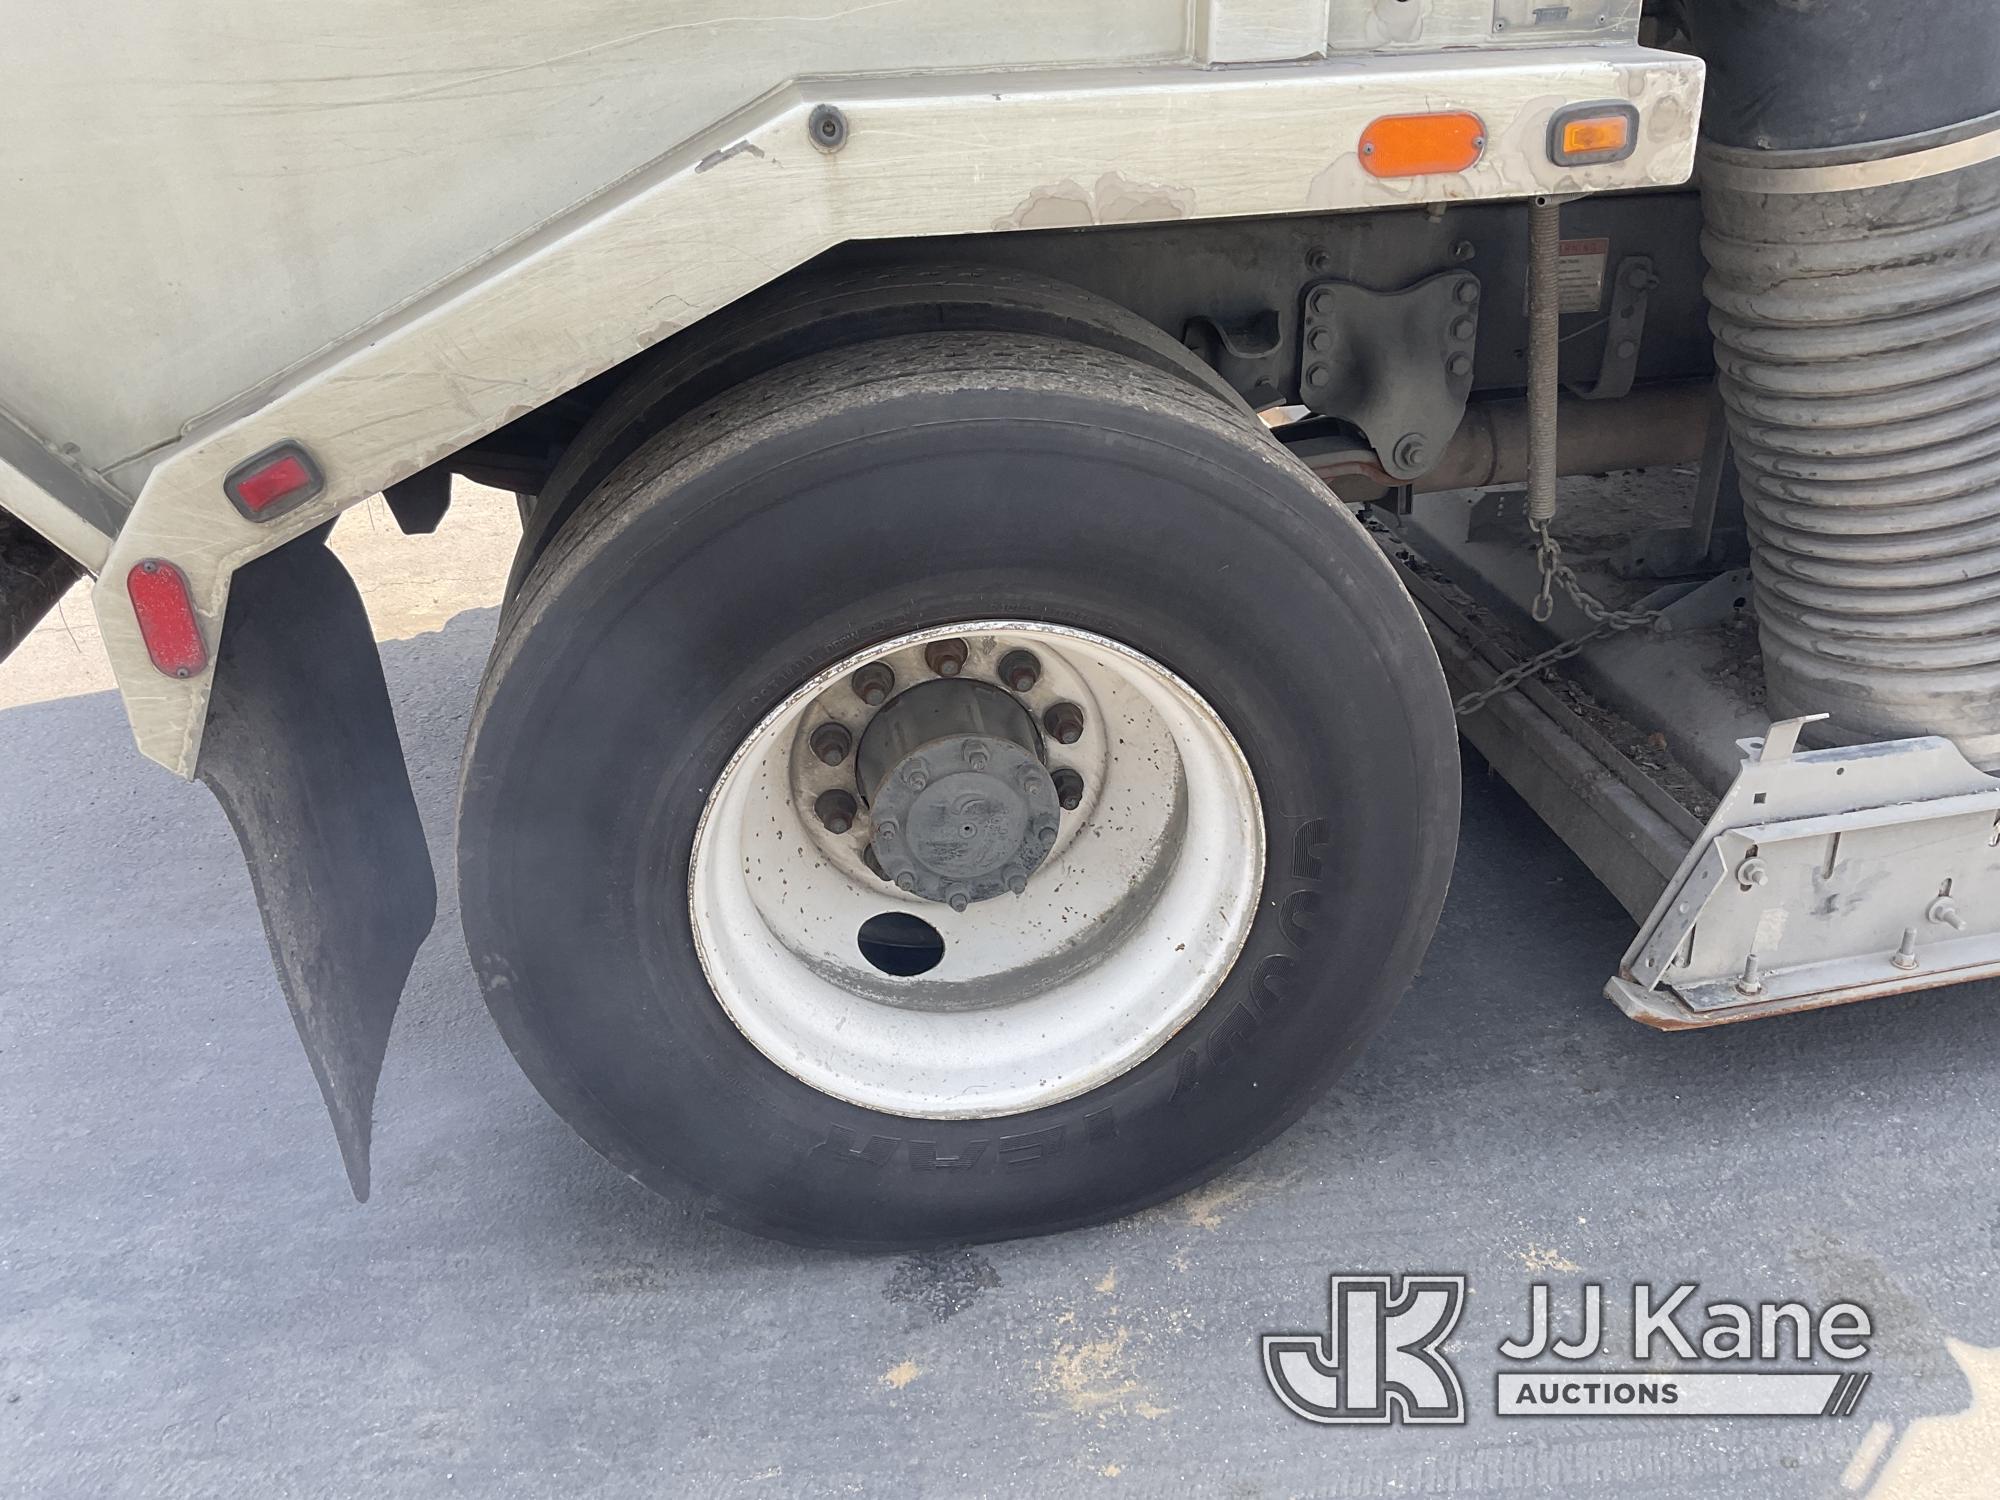 (Jurupa Valley, CA) 2011 Freightliner M2 106 Street Sweeper Runs & Moves, Engine Runs Rough With Whi